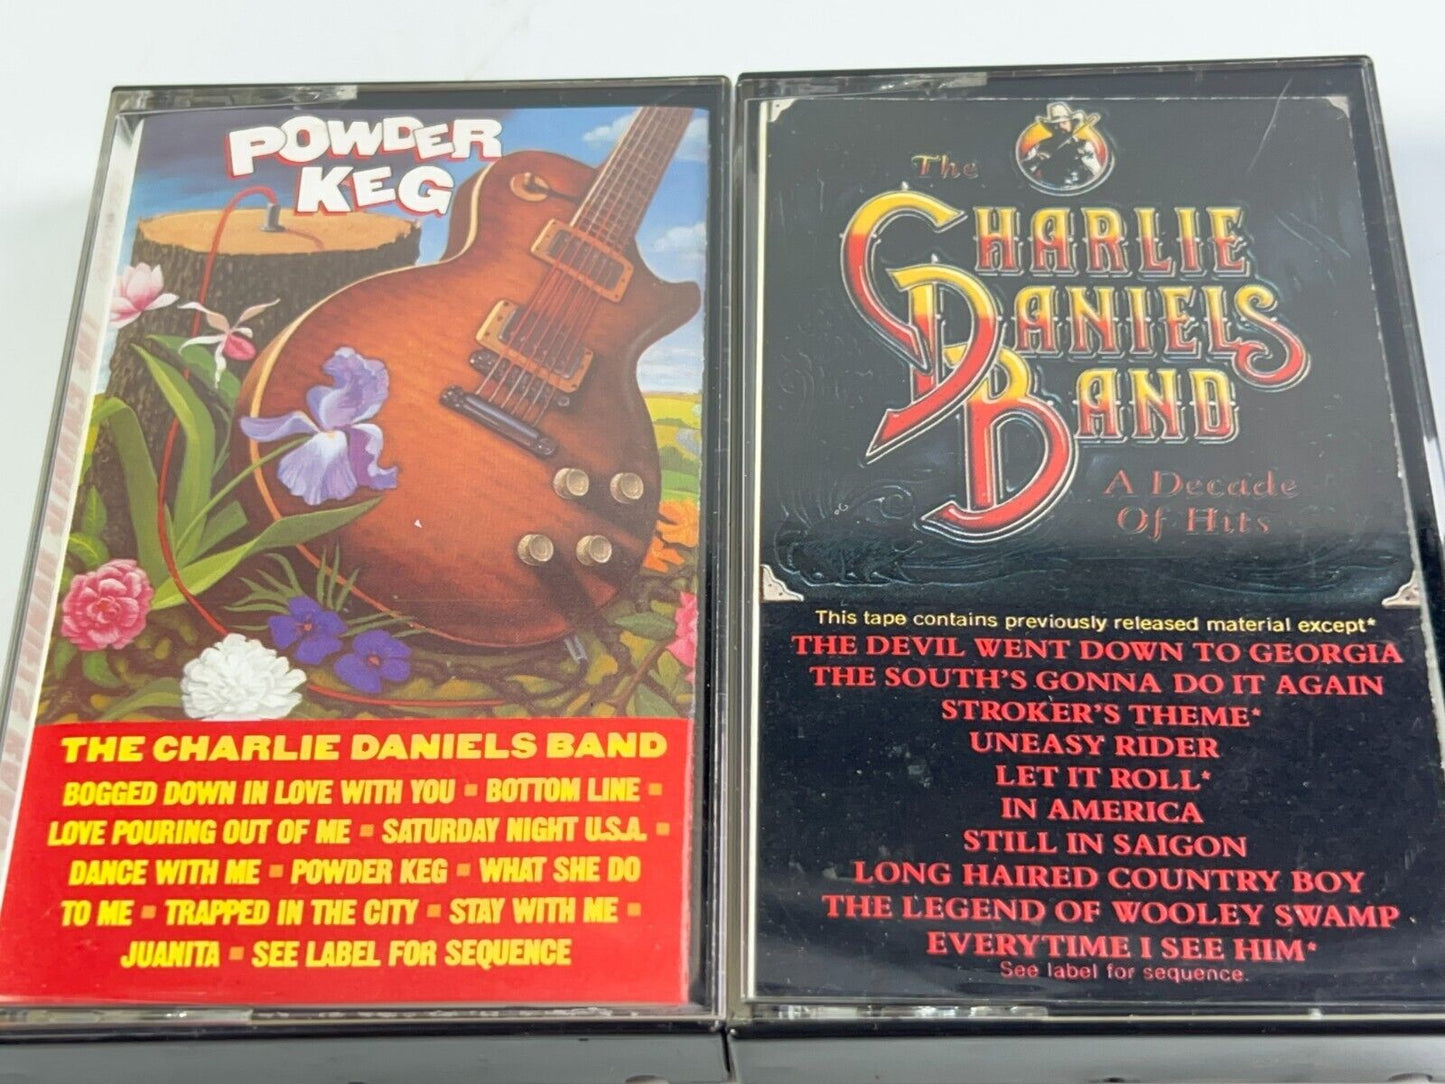 Charlie Daniels Band Powder Keg & A Decade of Hits Cassette Tapes